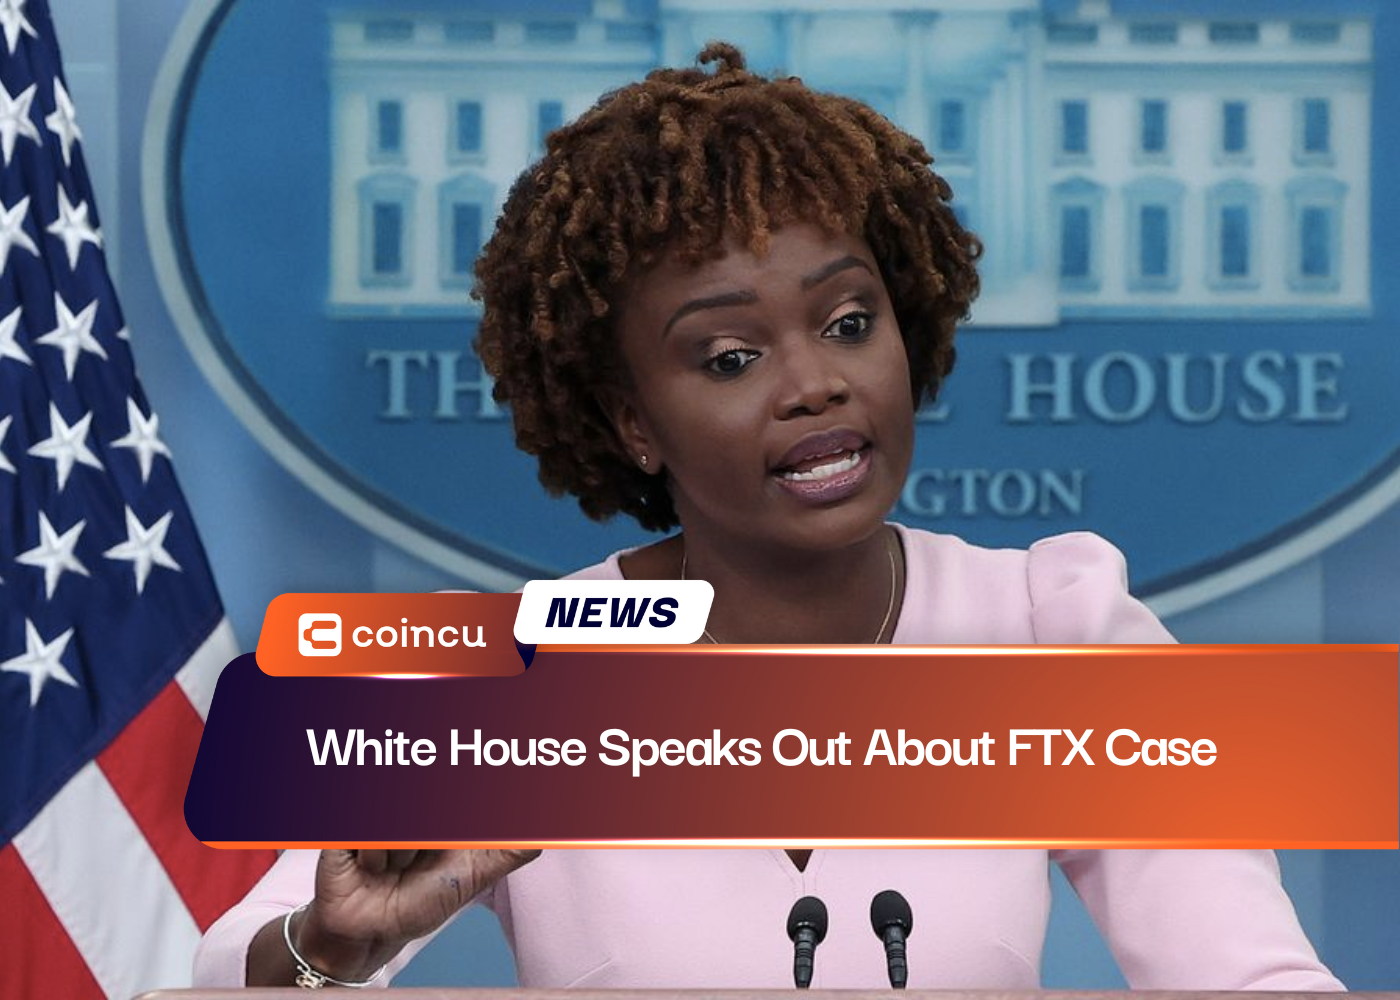 White House Speaks Out About FTX Case